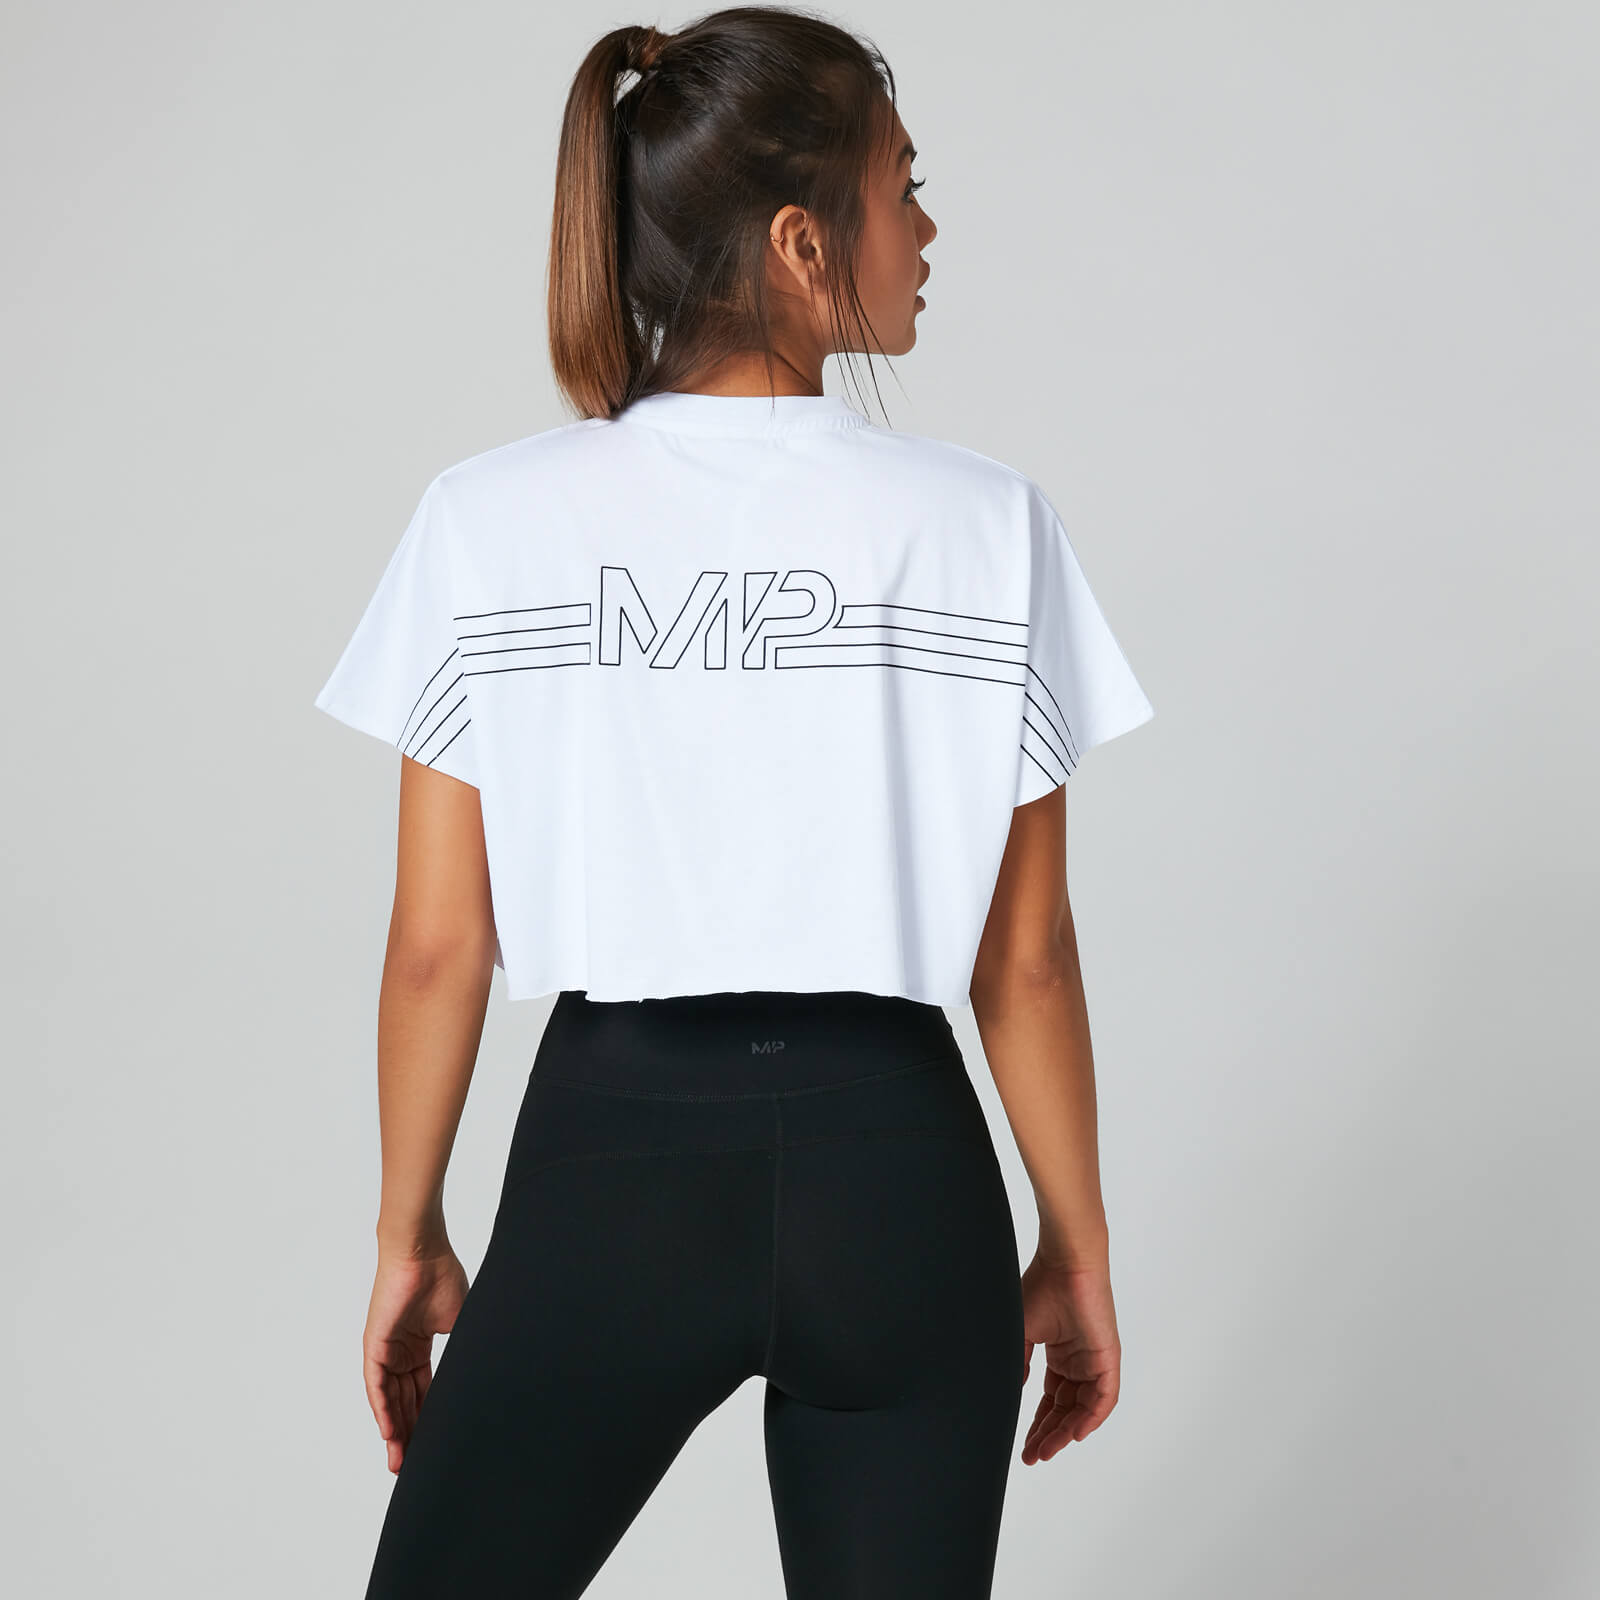 MP Branded Crop Top - White - XS